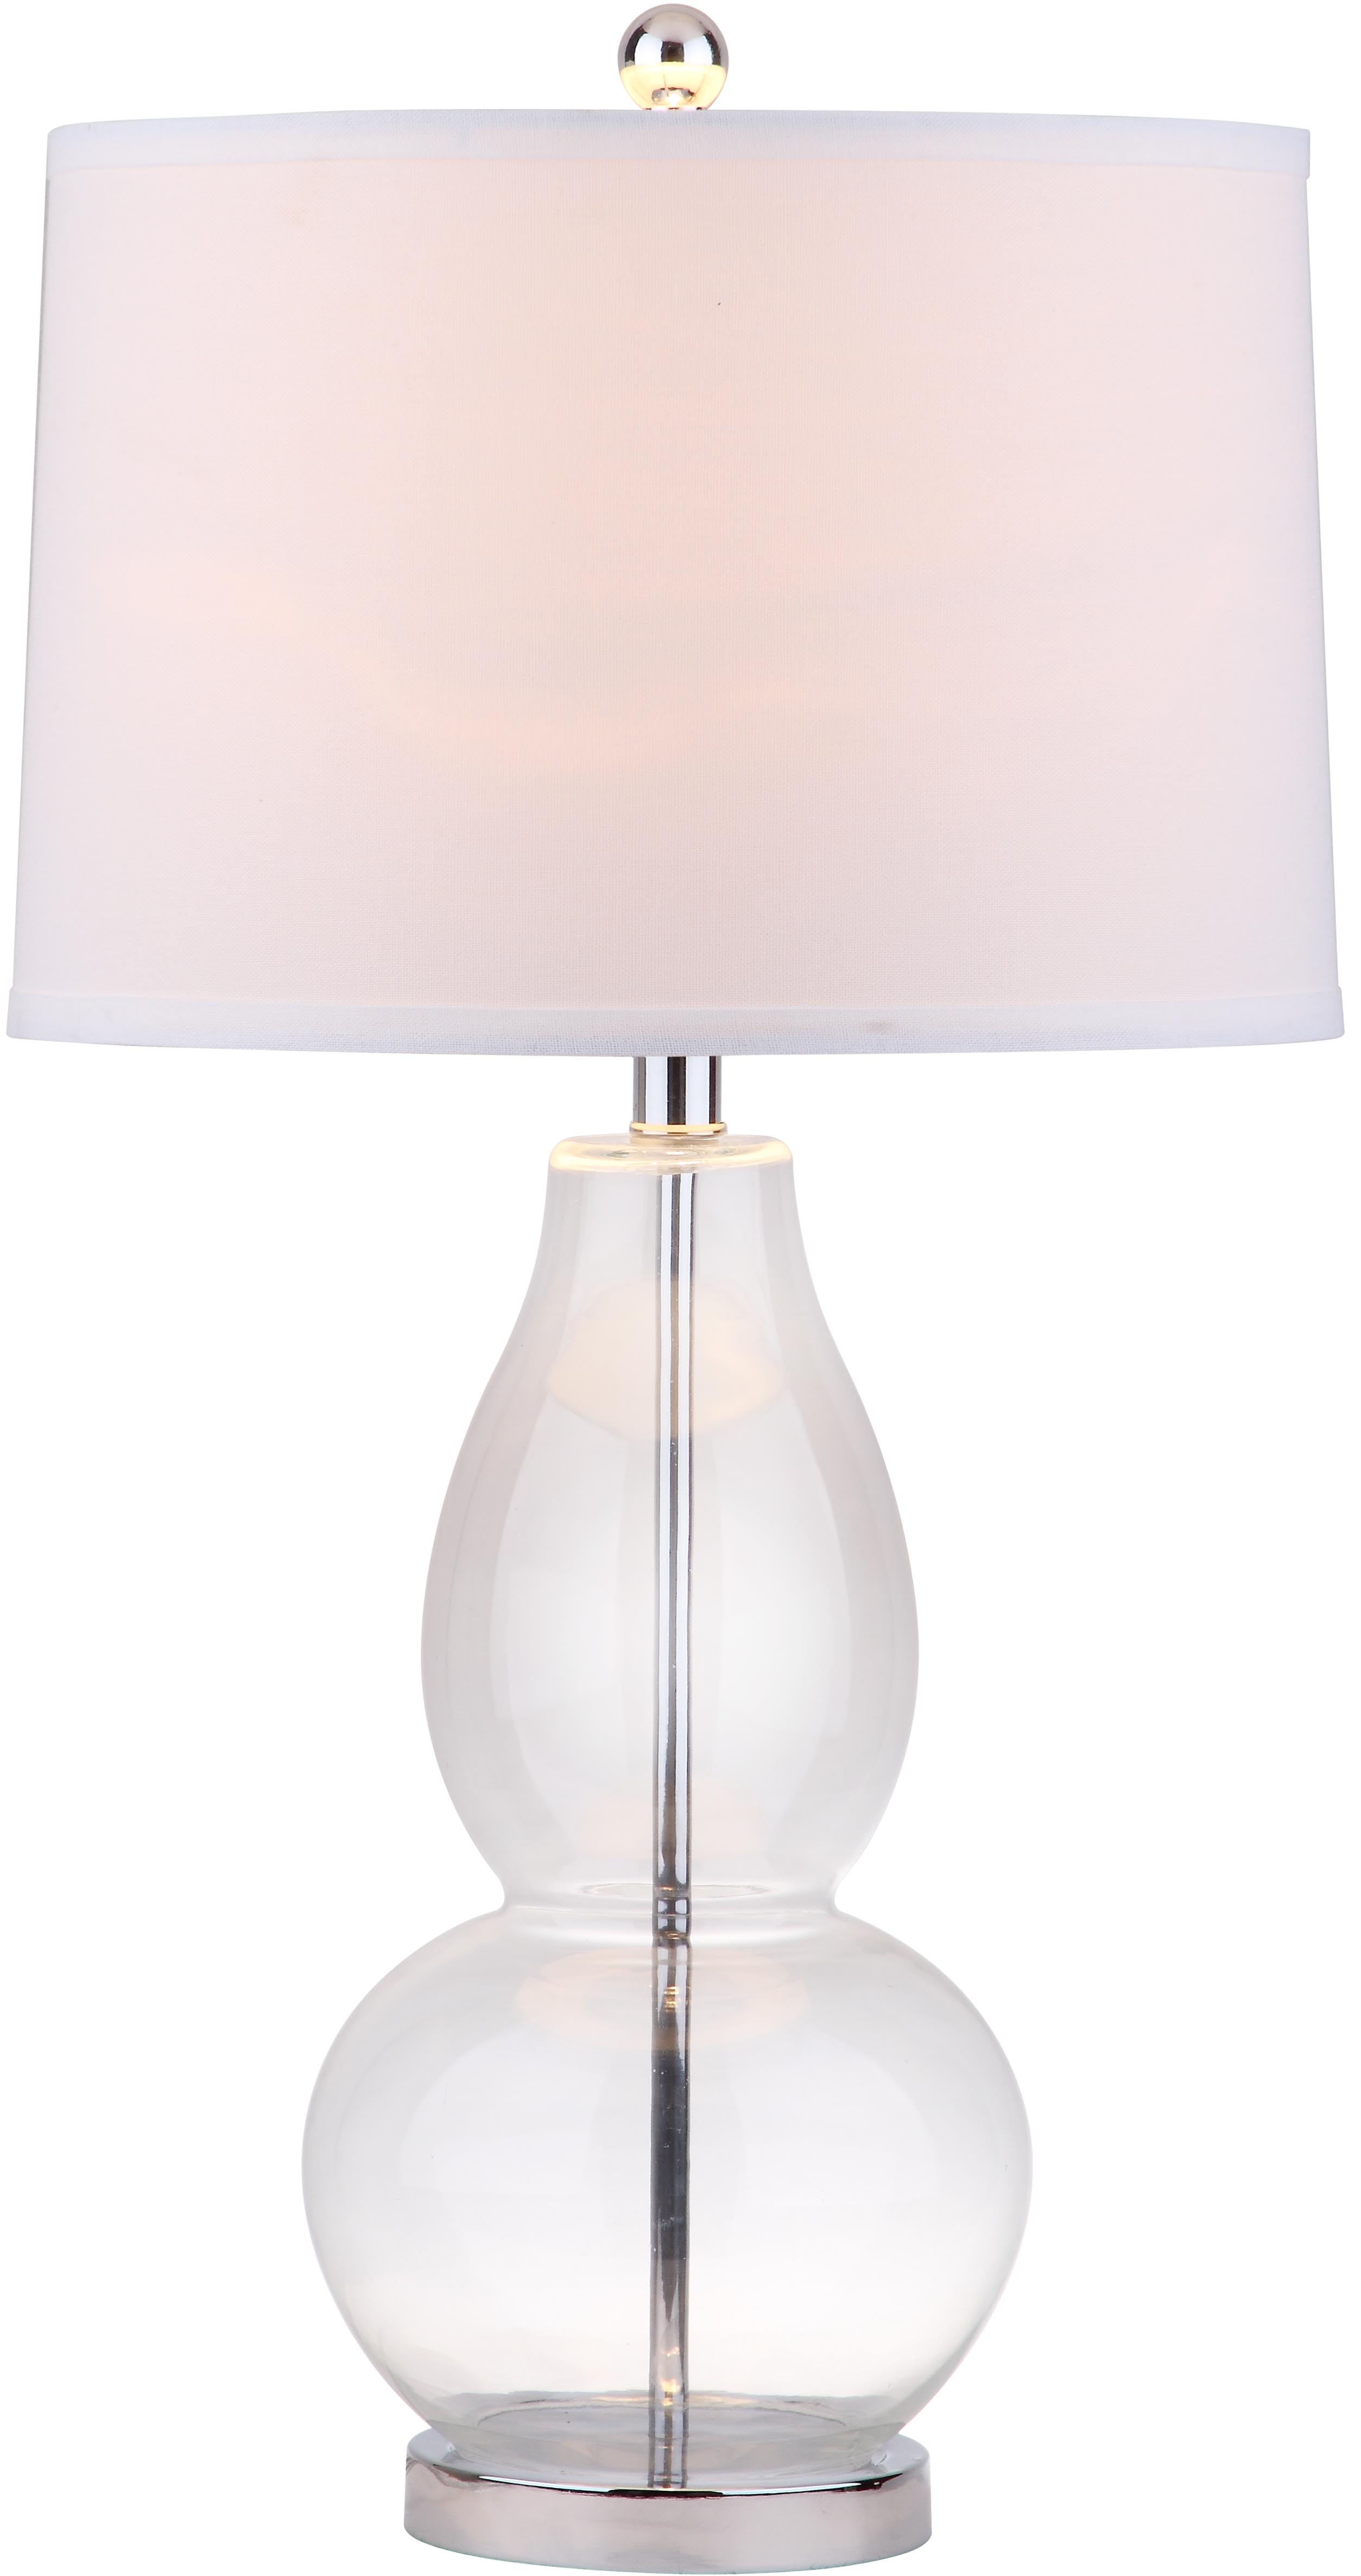 Mercurio 28.5-Inch H Double Gourd Table Lamp - Clear - Arlo Home - Image 1